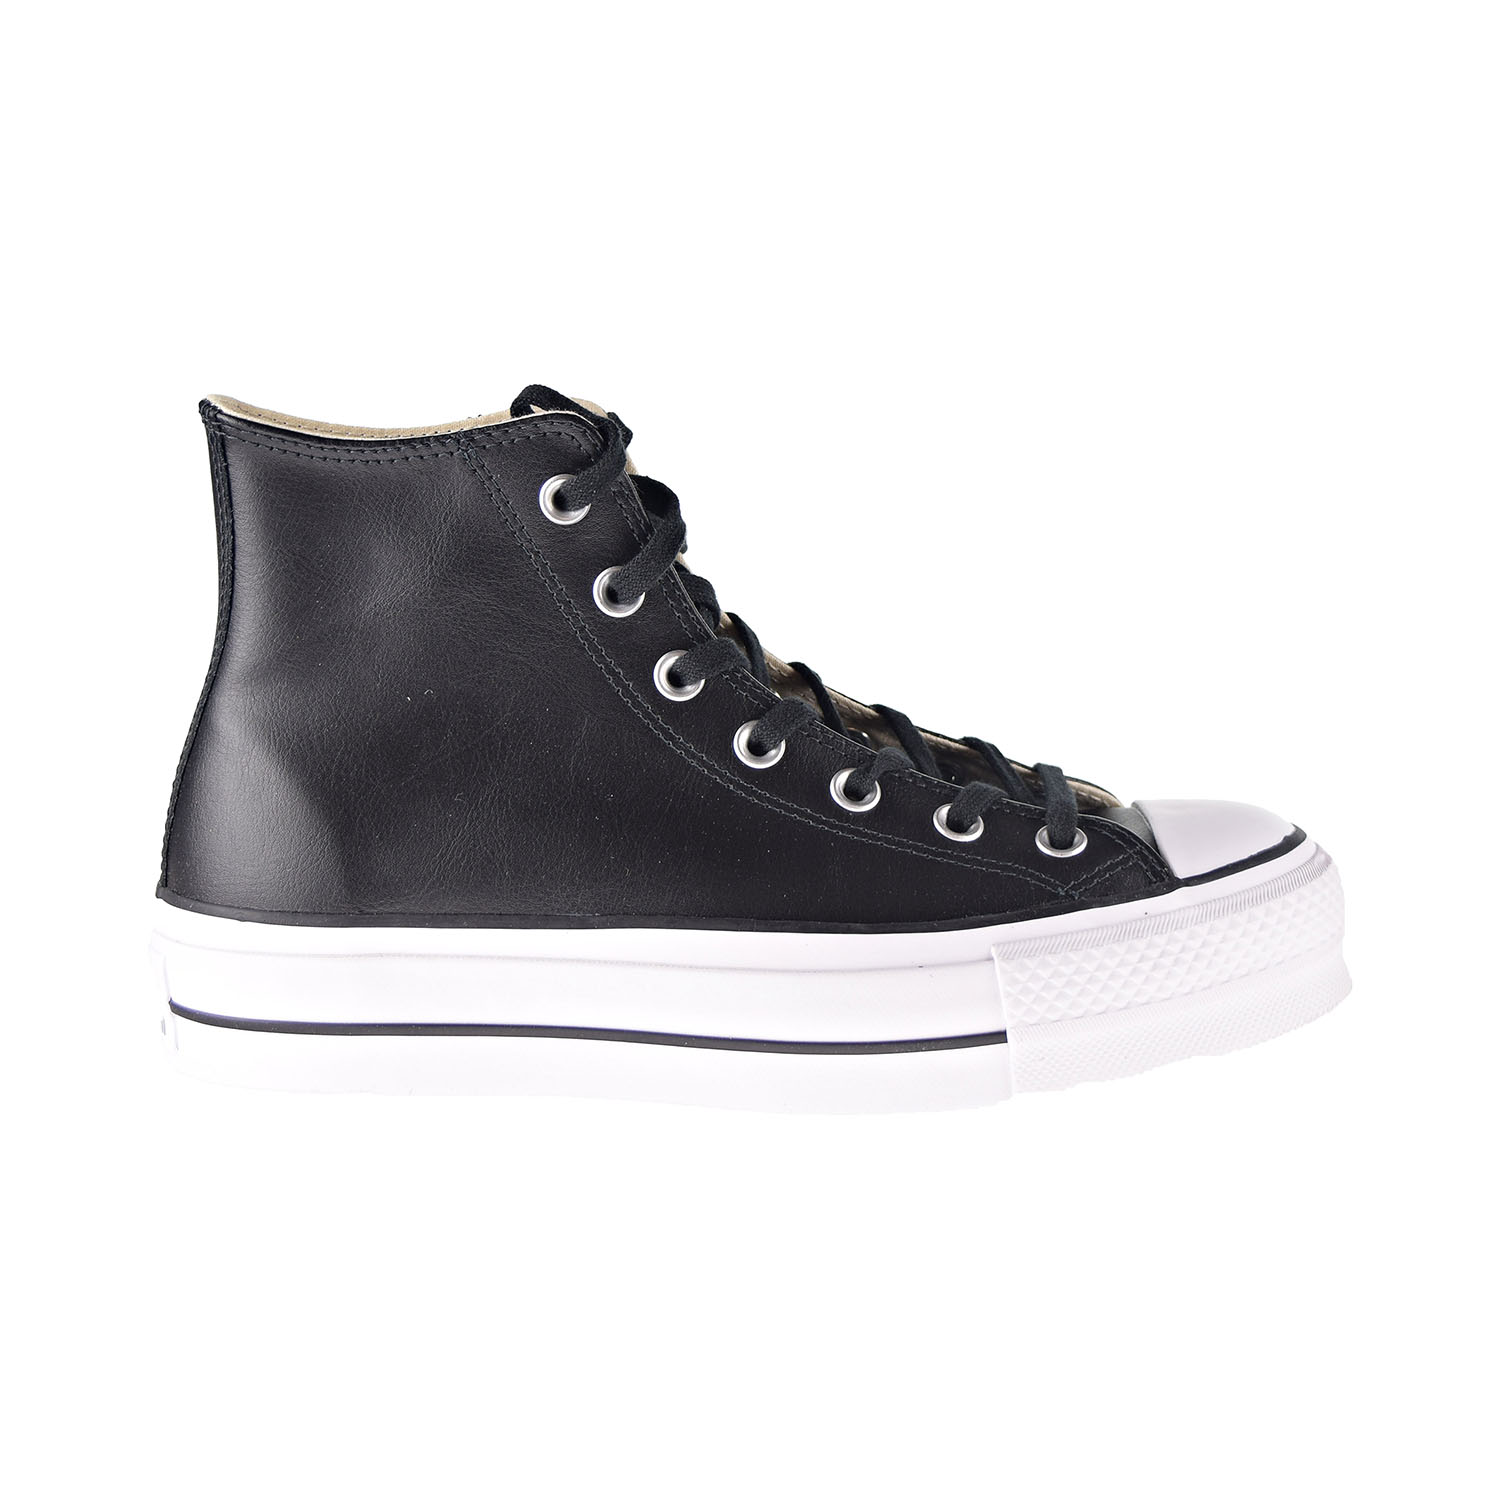 converse chuck taylor all star leather hi shoes